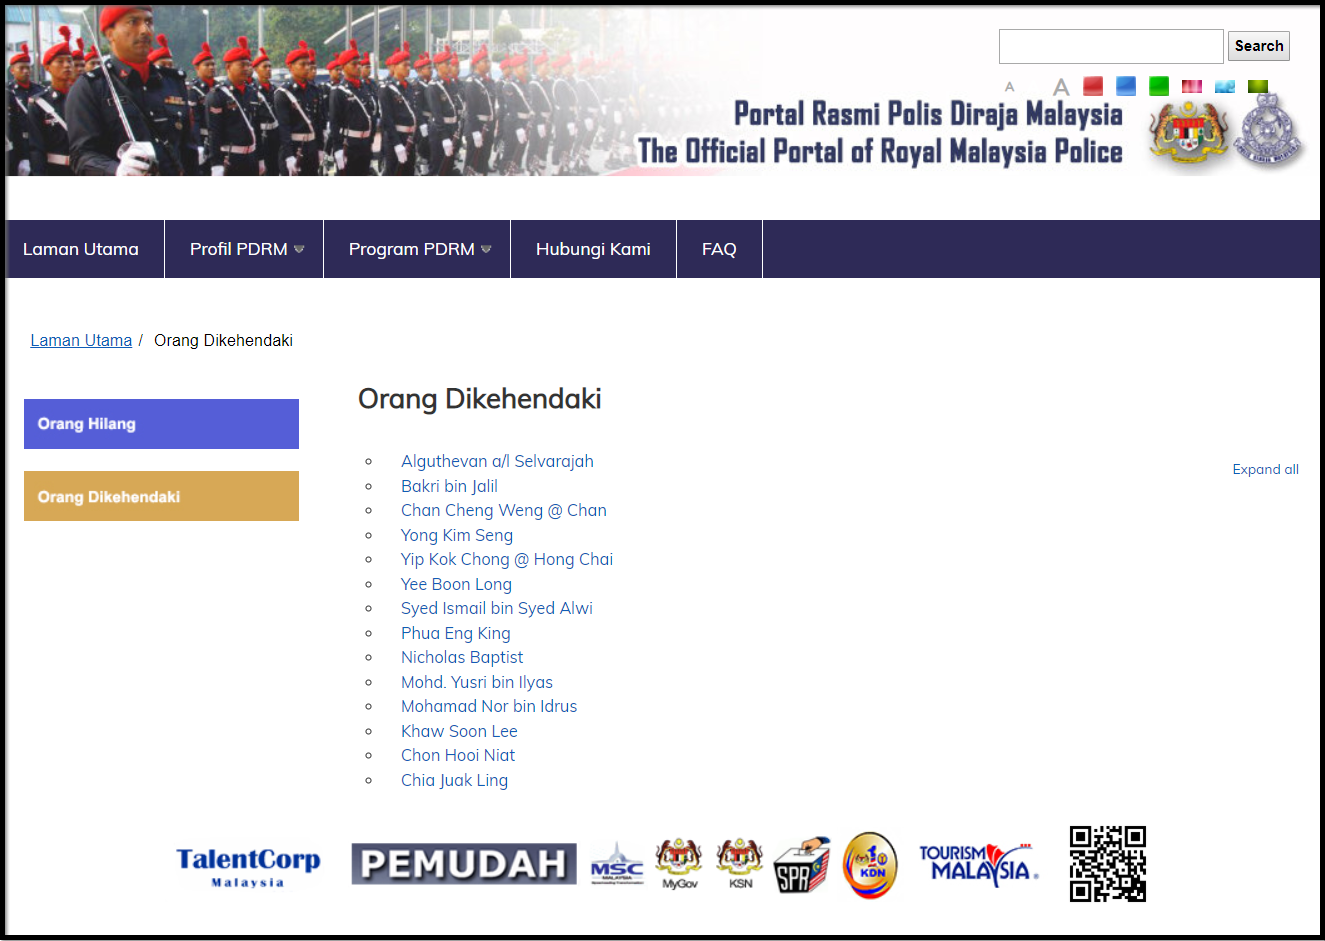 Jho Low's name is not even in the list! Screengrab from PDRM's website